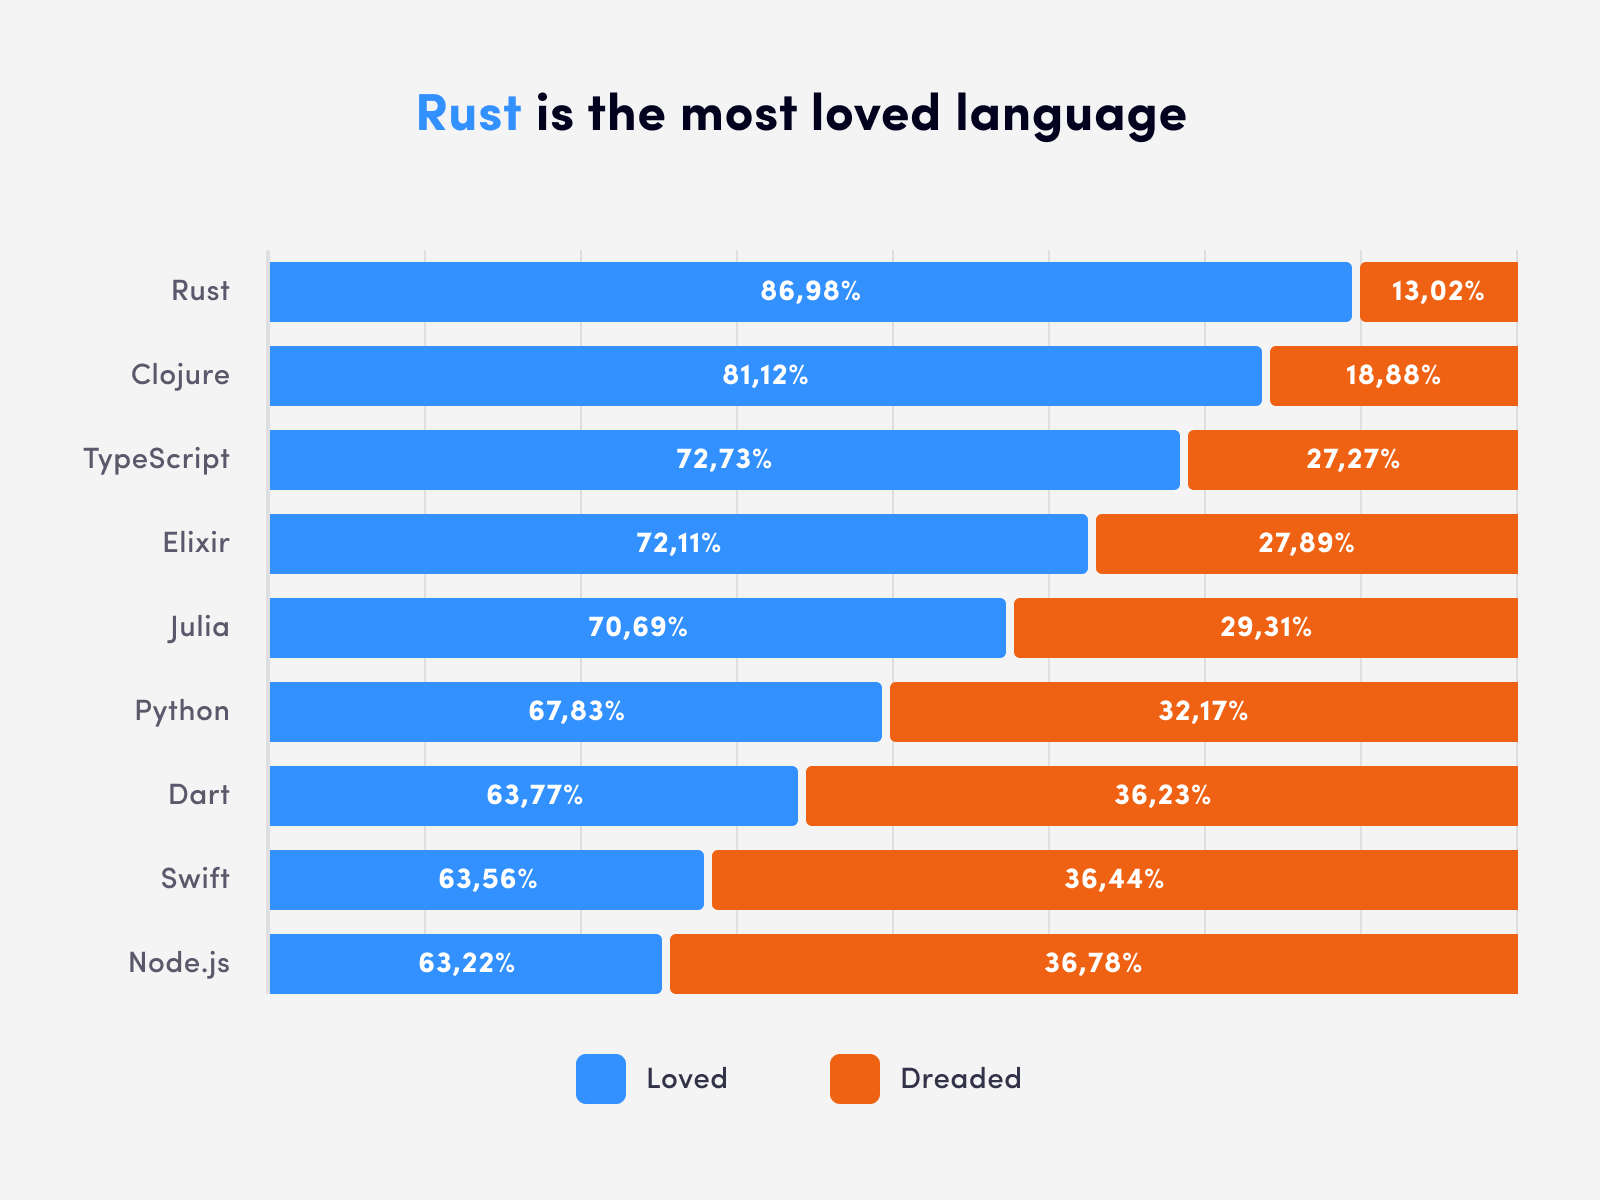 Rust is the most loved language